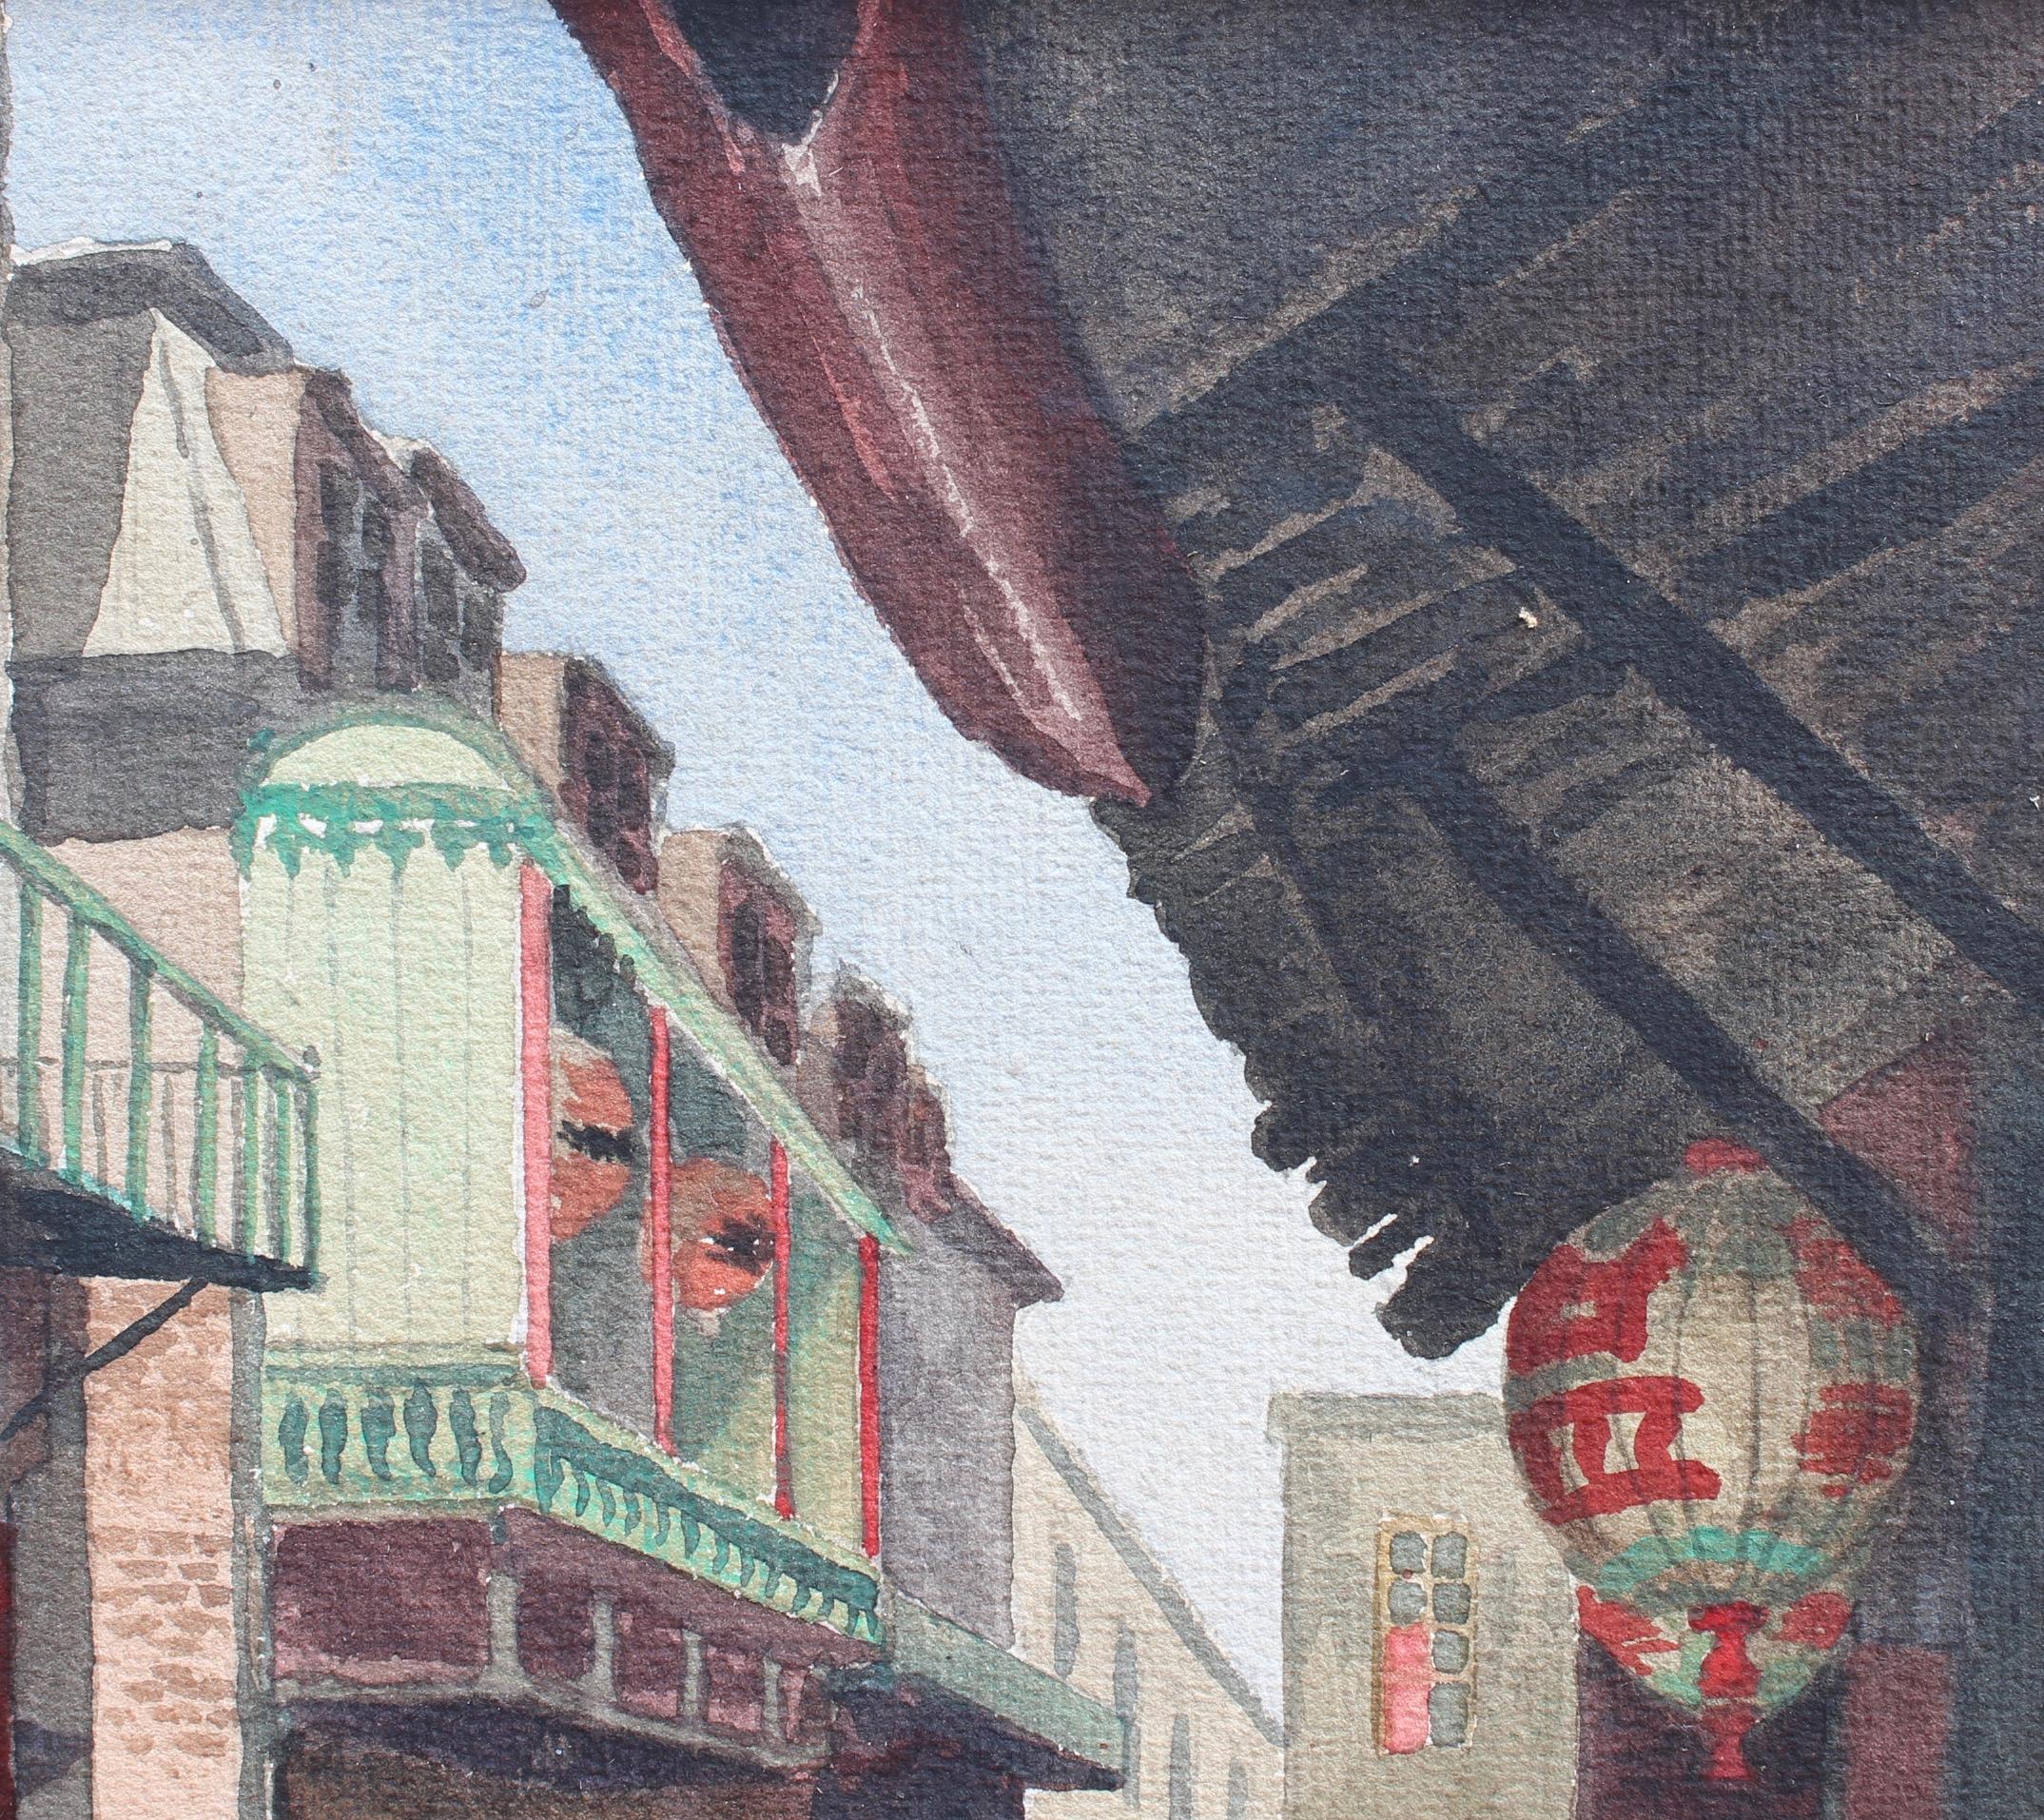 Chinatown, San Francisco - Expressionist Painting by Edward Wilson Currier